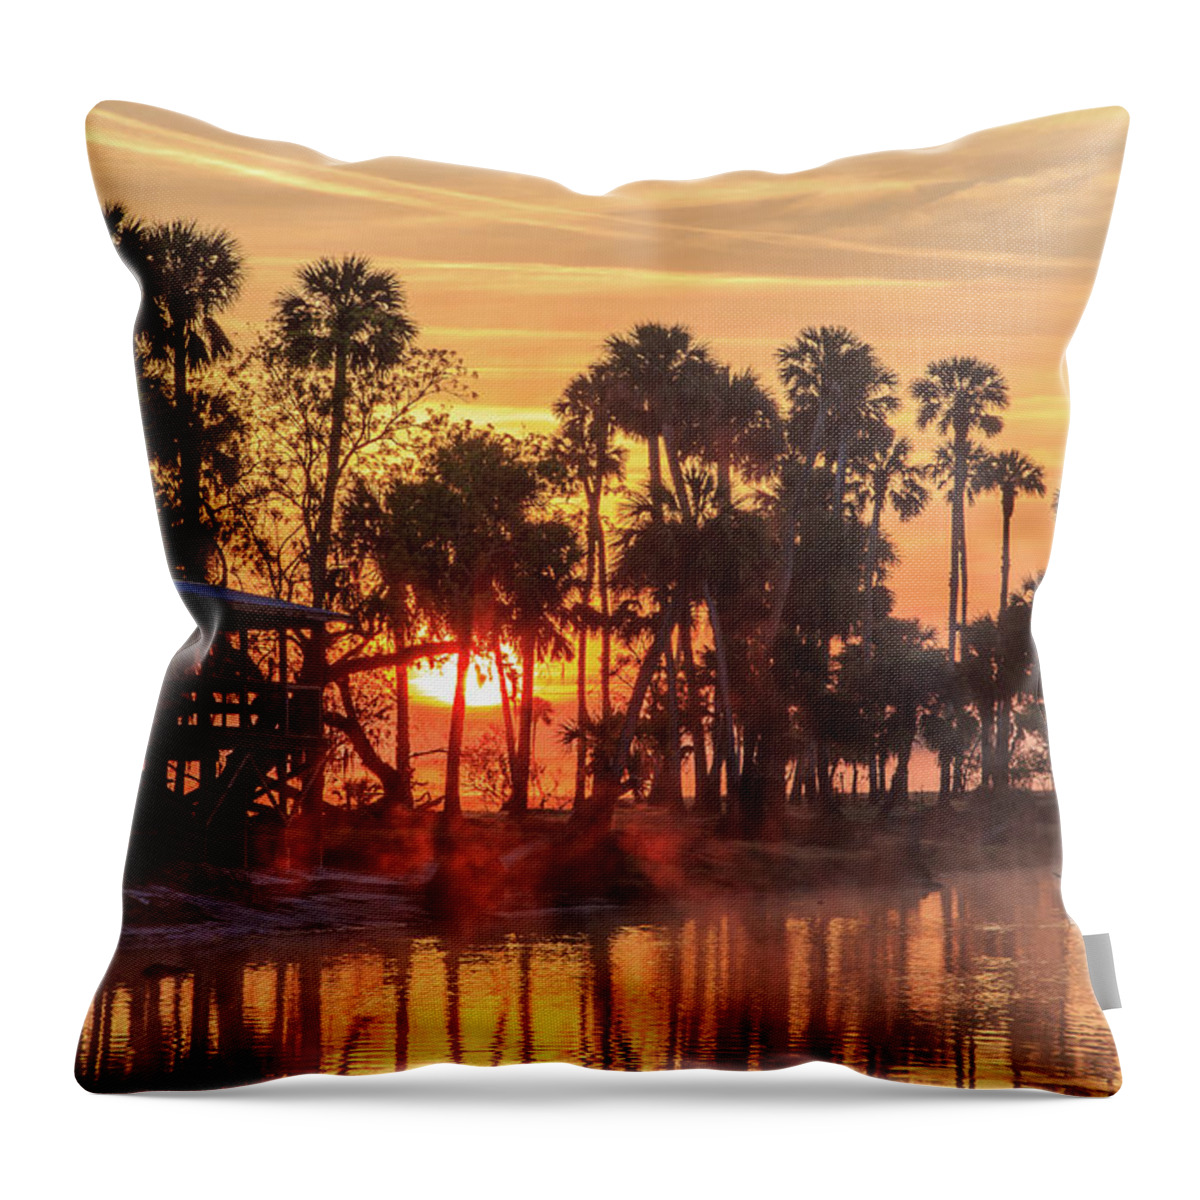 Florida Throw Pillow featuring the photograph Econ River Sunrise by Stefan Mazzola